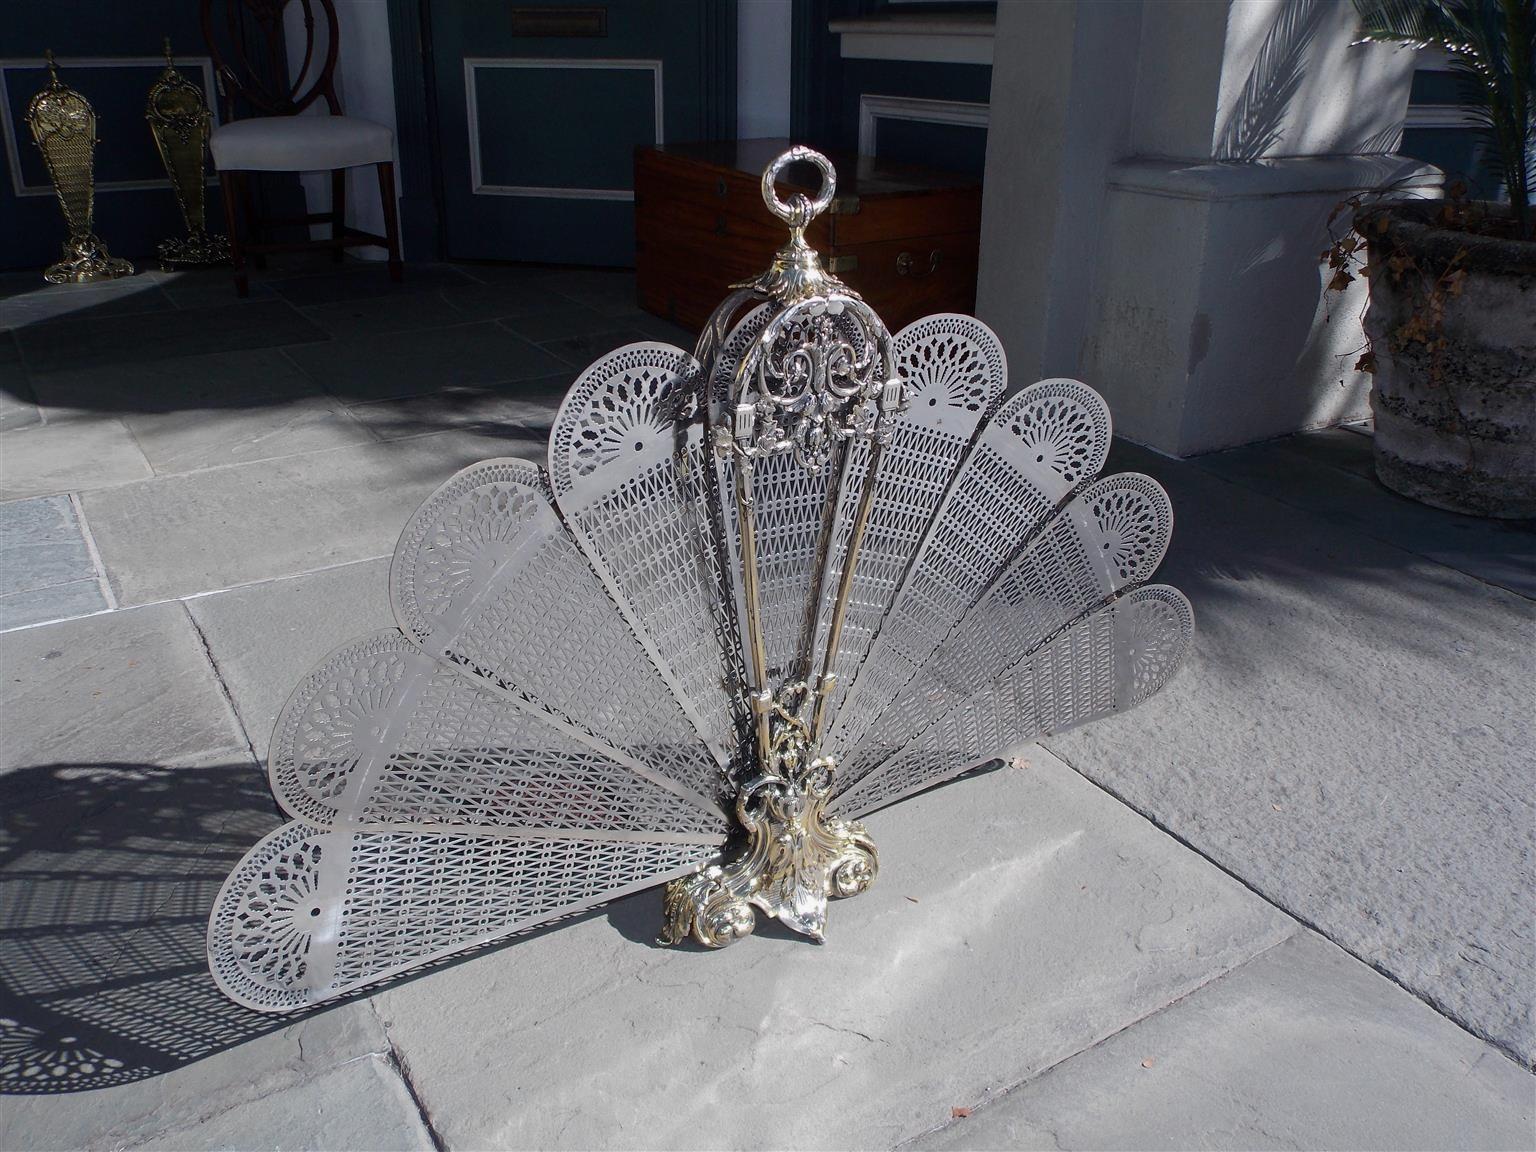 French polished steel fire place screen with centered ribbon handle, decorative pierced chased folding fans, bell flower motif, and terminating on a scrolled acanthus base with flanking floral medallions, Early 19th century.